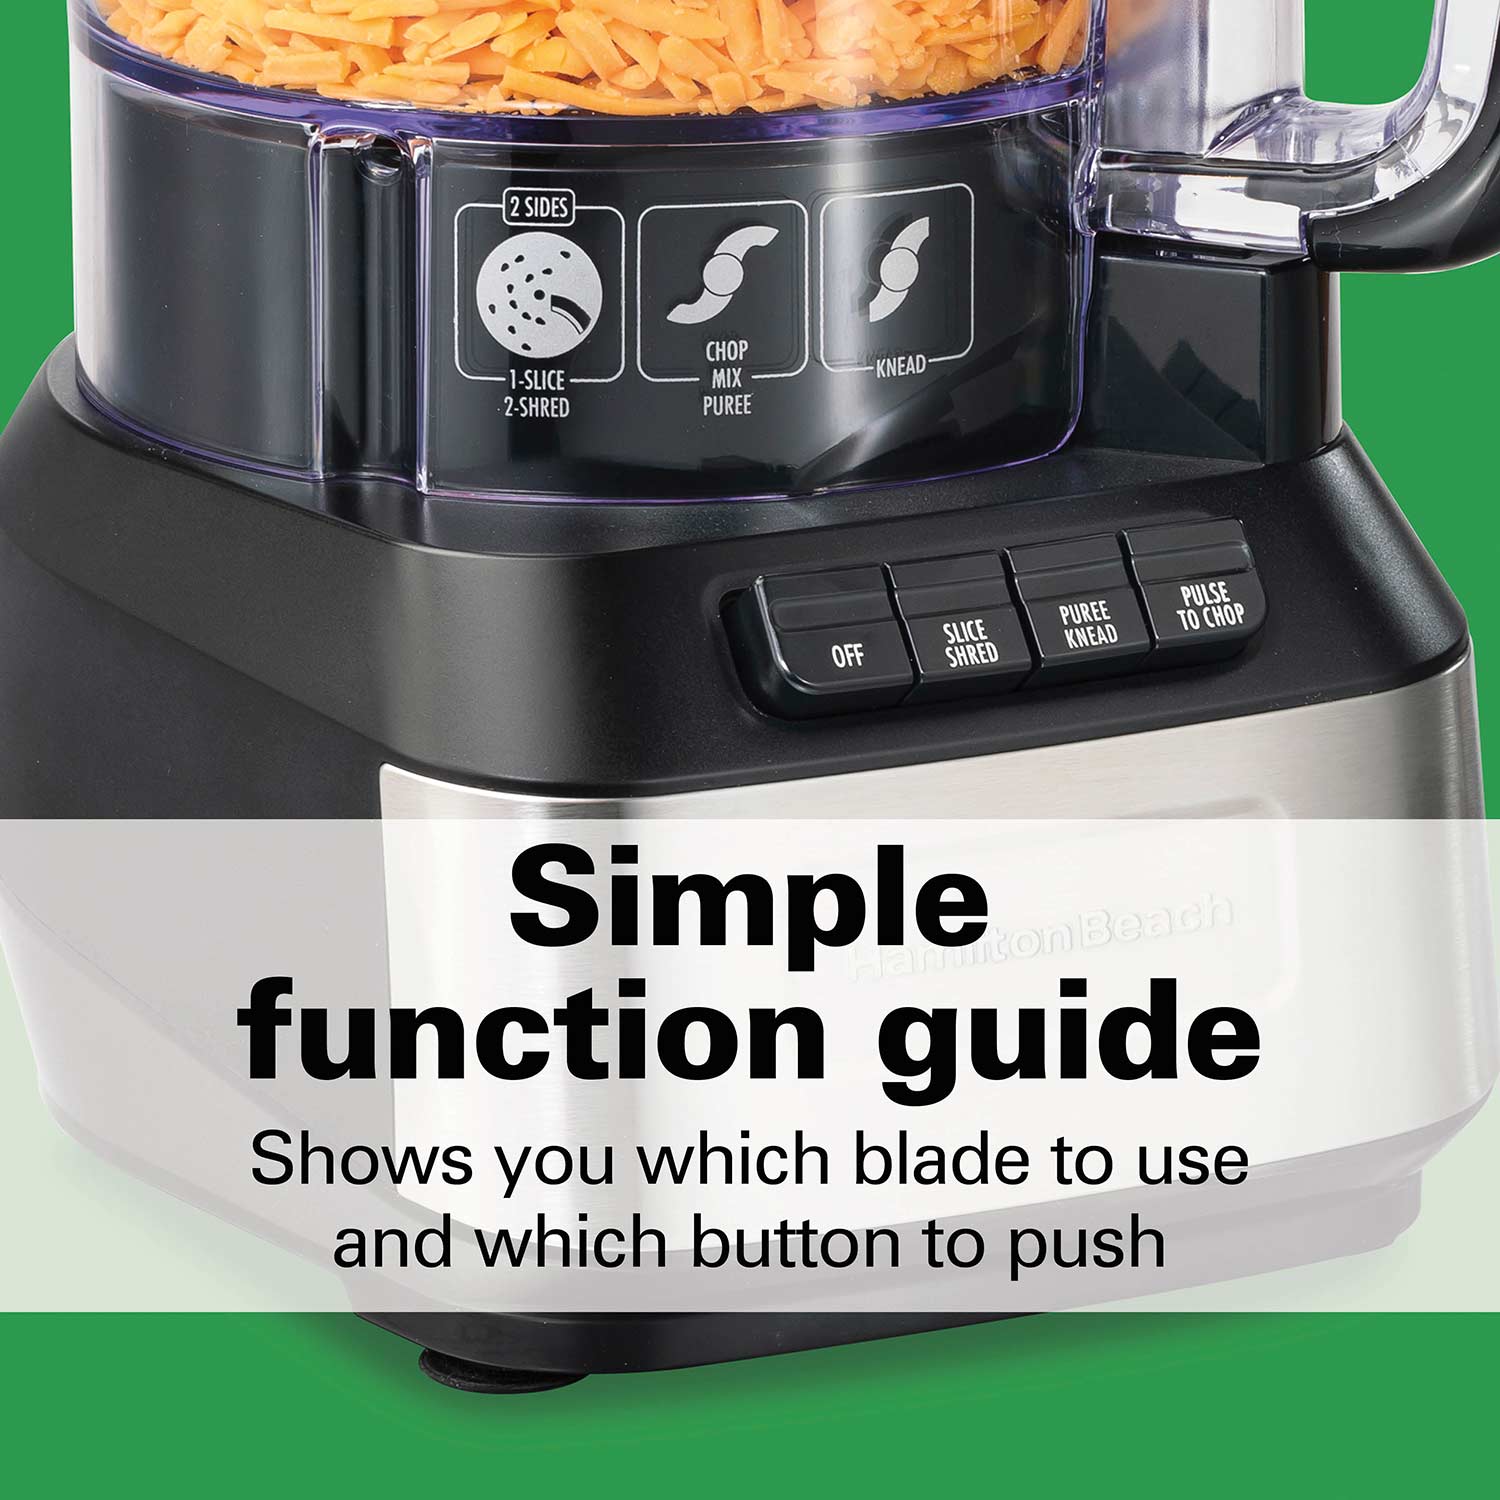 Hamilton Beach Recertified 12-Cup Stack & Snap™ Food Processor - R70727